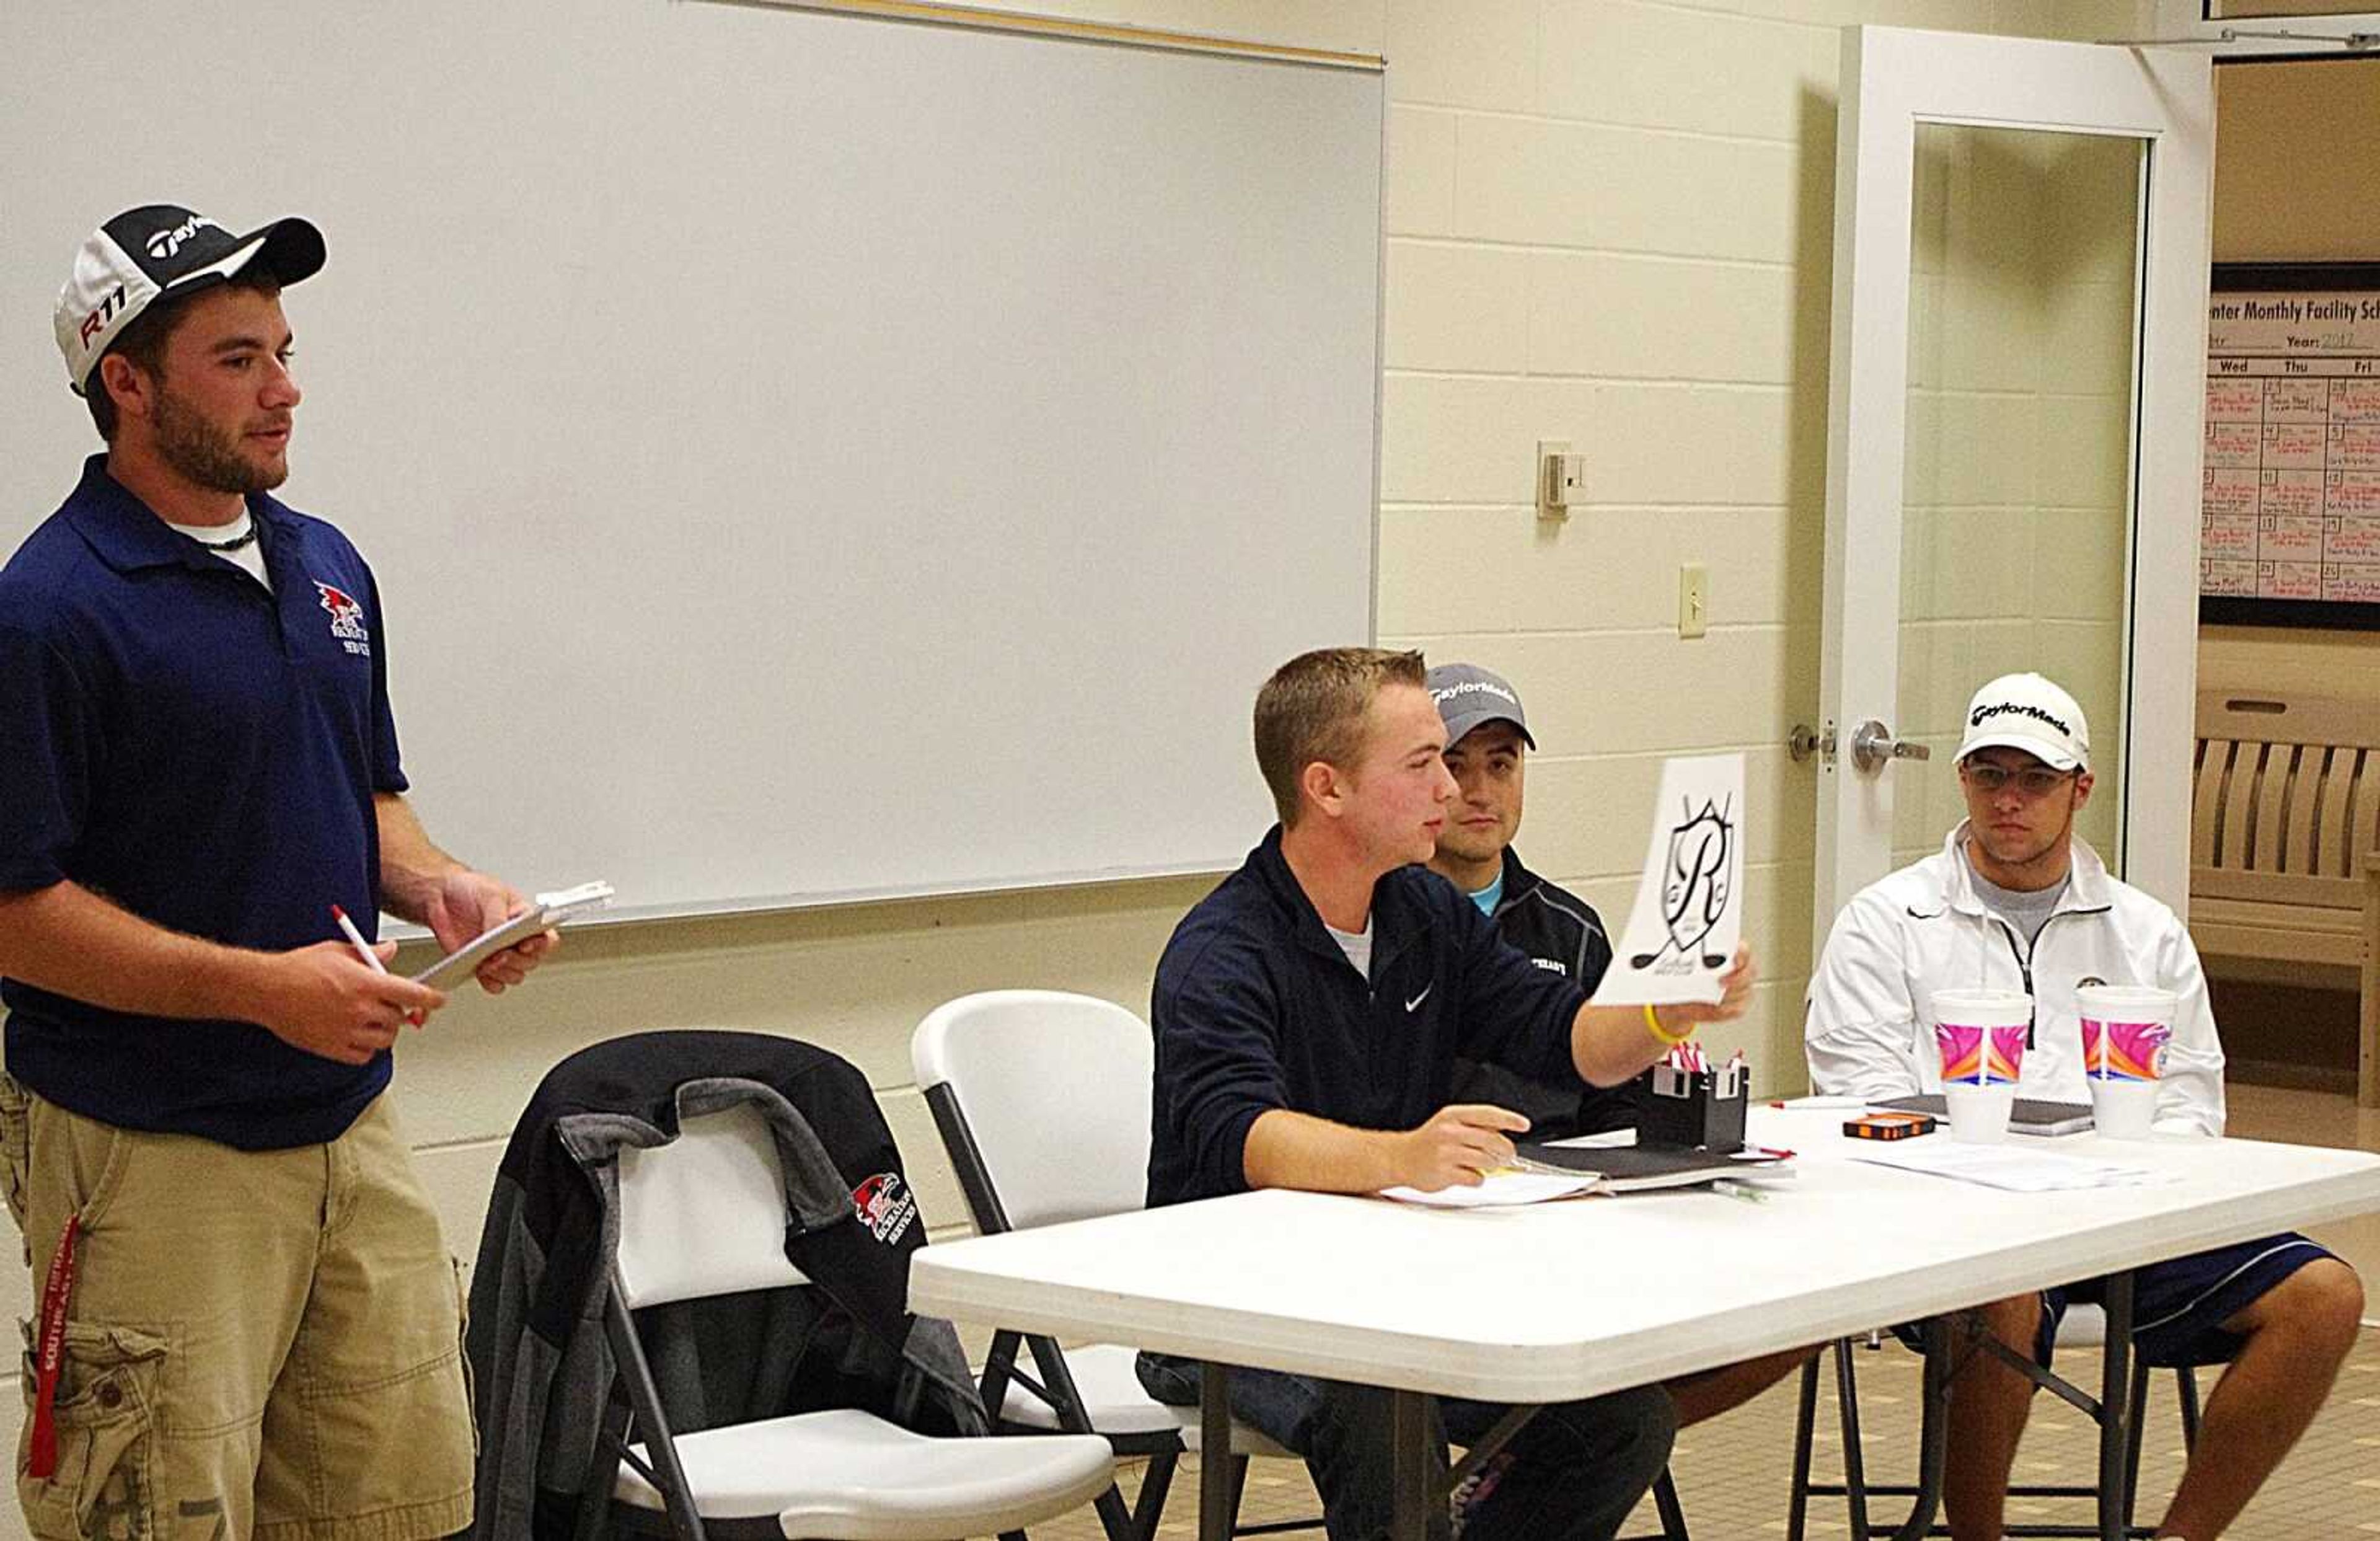 Founders of the golf club talk to students who are interested in joining during their first meeting on Oct. 3 in the Student Aquatics Room at the Student Recreation Center-North. Photo by Nathan Hamilton